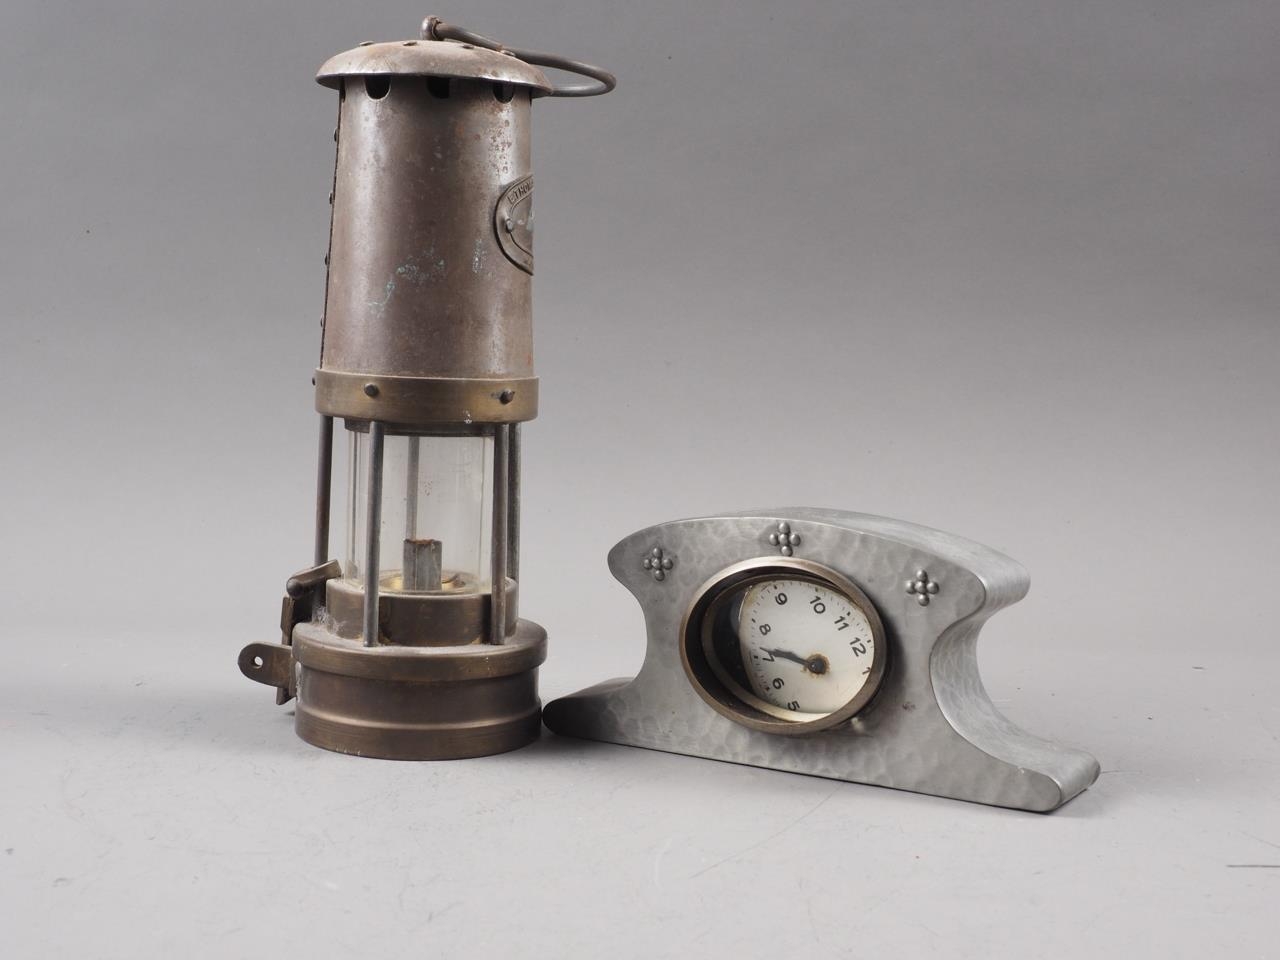 A miner's safety lamp, by Thomas Williams, and a hammered pewter cased mantel clock